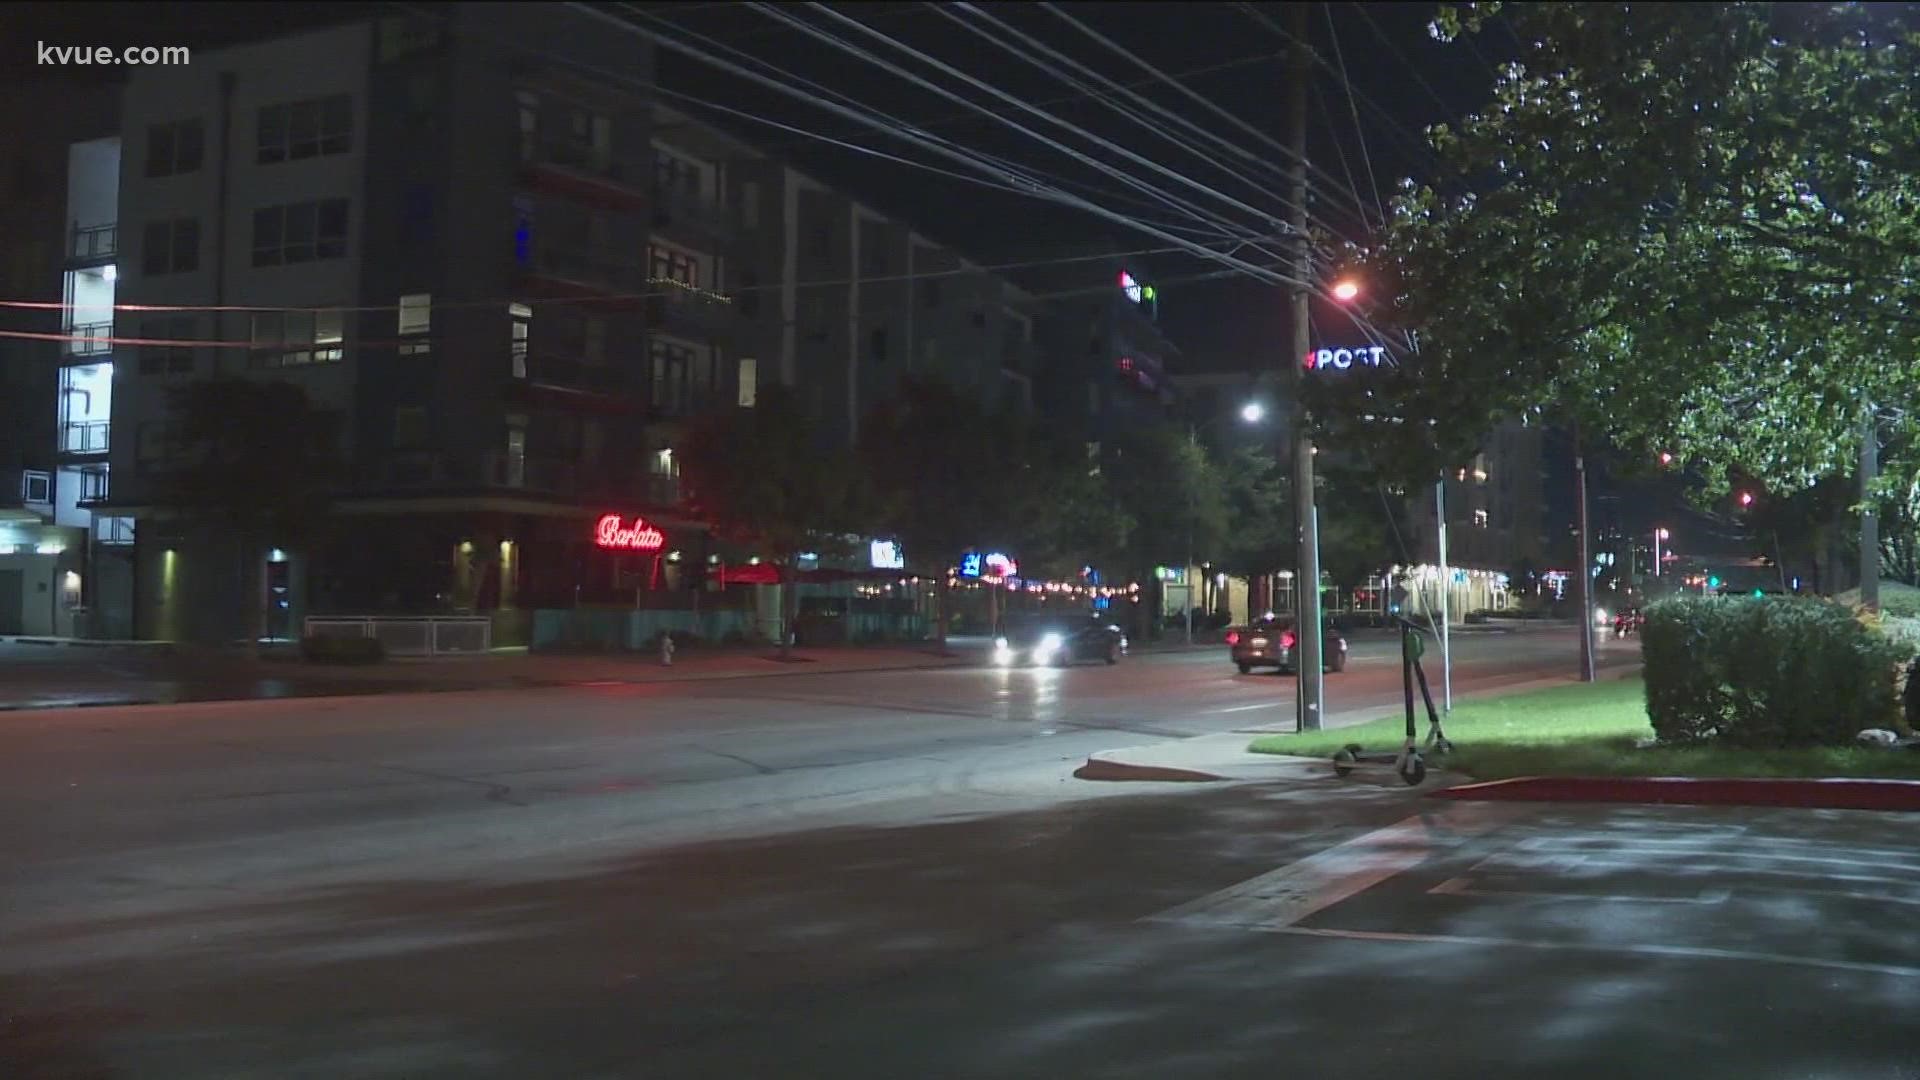 A person was taken to the hospital after a crash in South Austin last night.